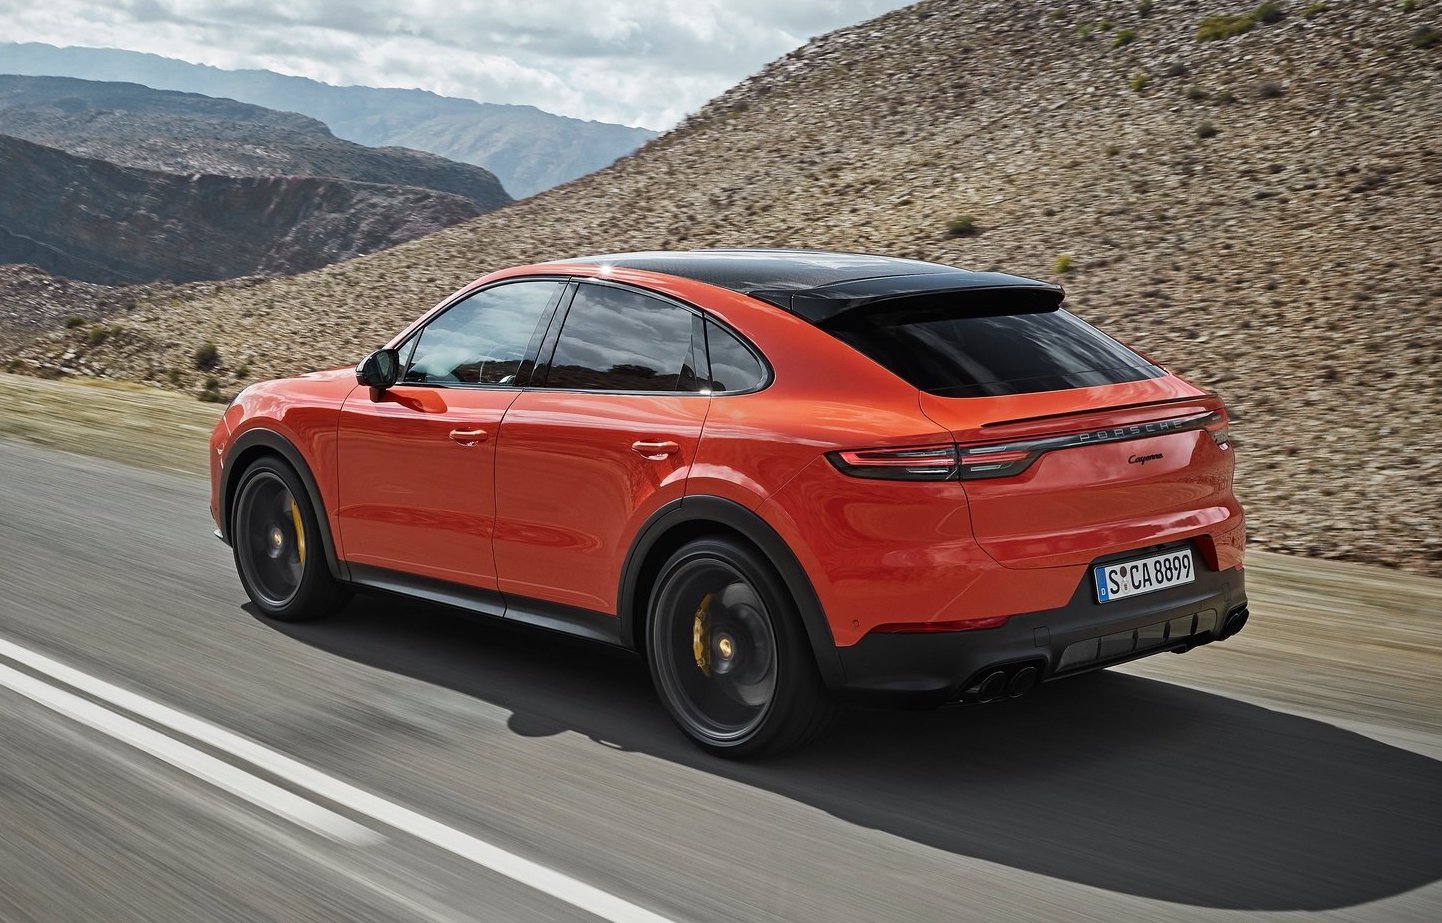 Porsche Cayenne Coupe hybrid coming later this year